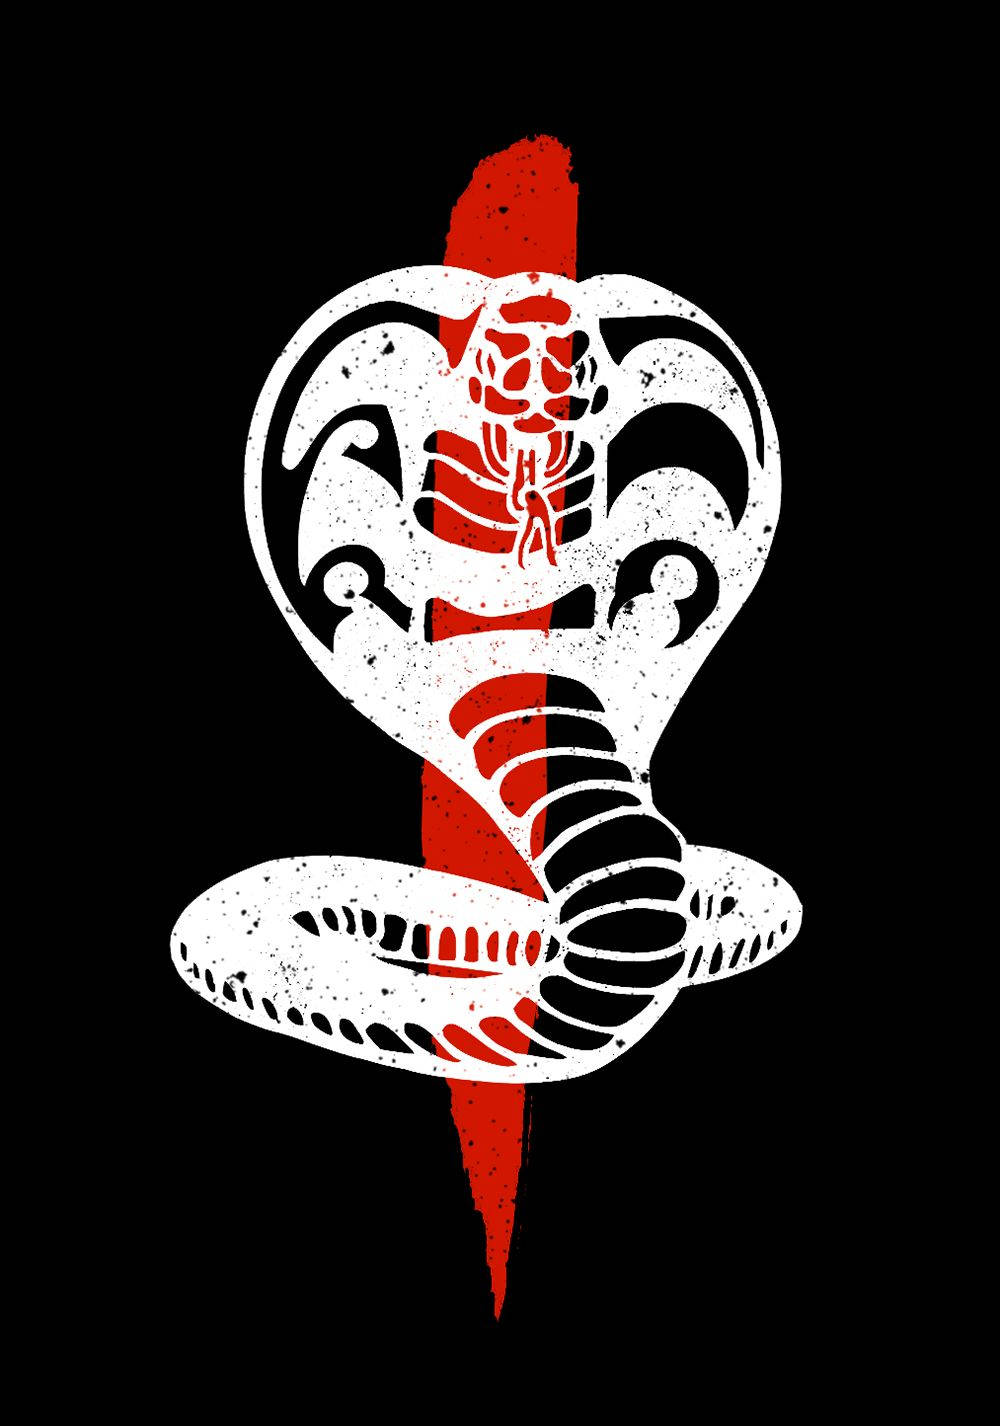 100 Cobra Kai HD Wallpapers and Backgrounds